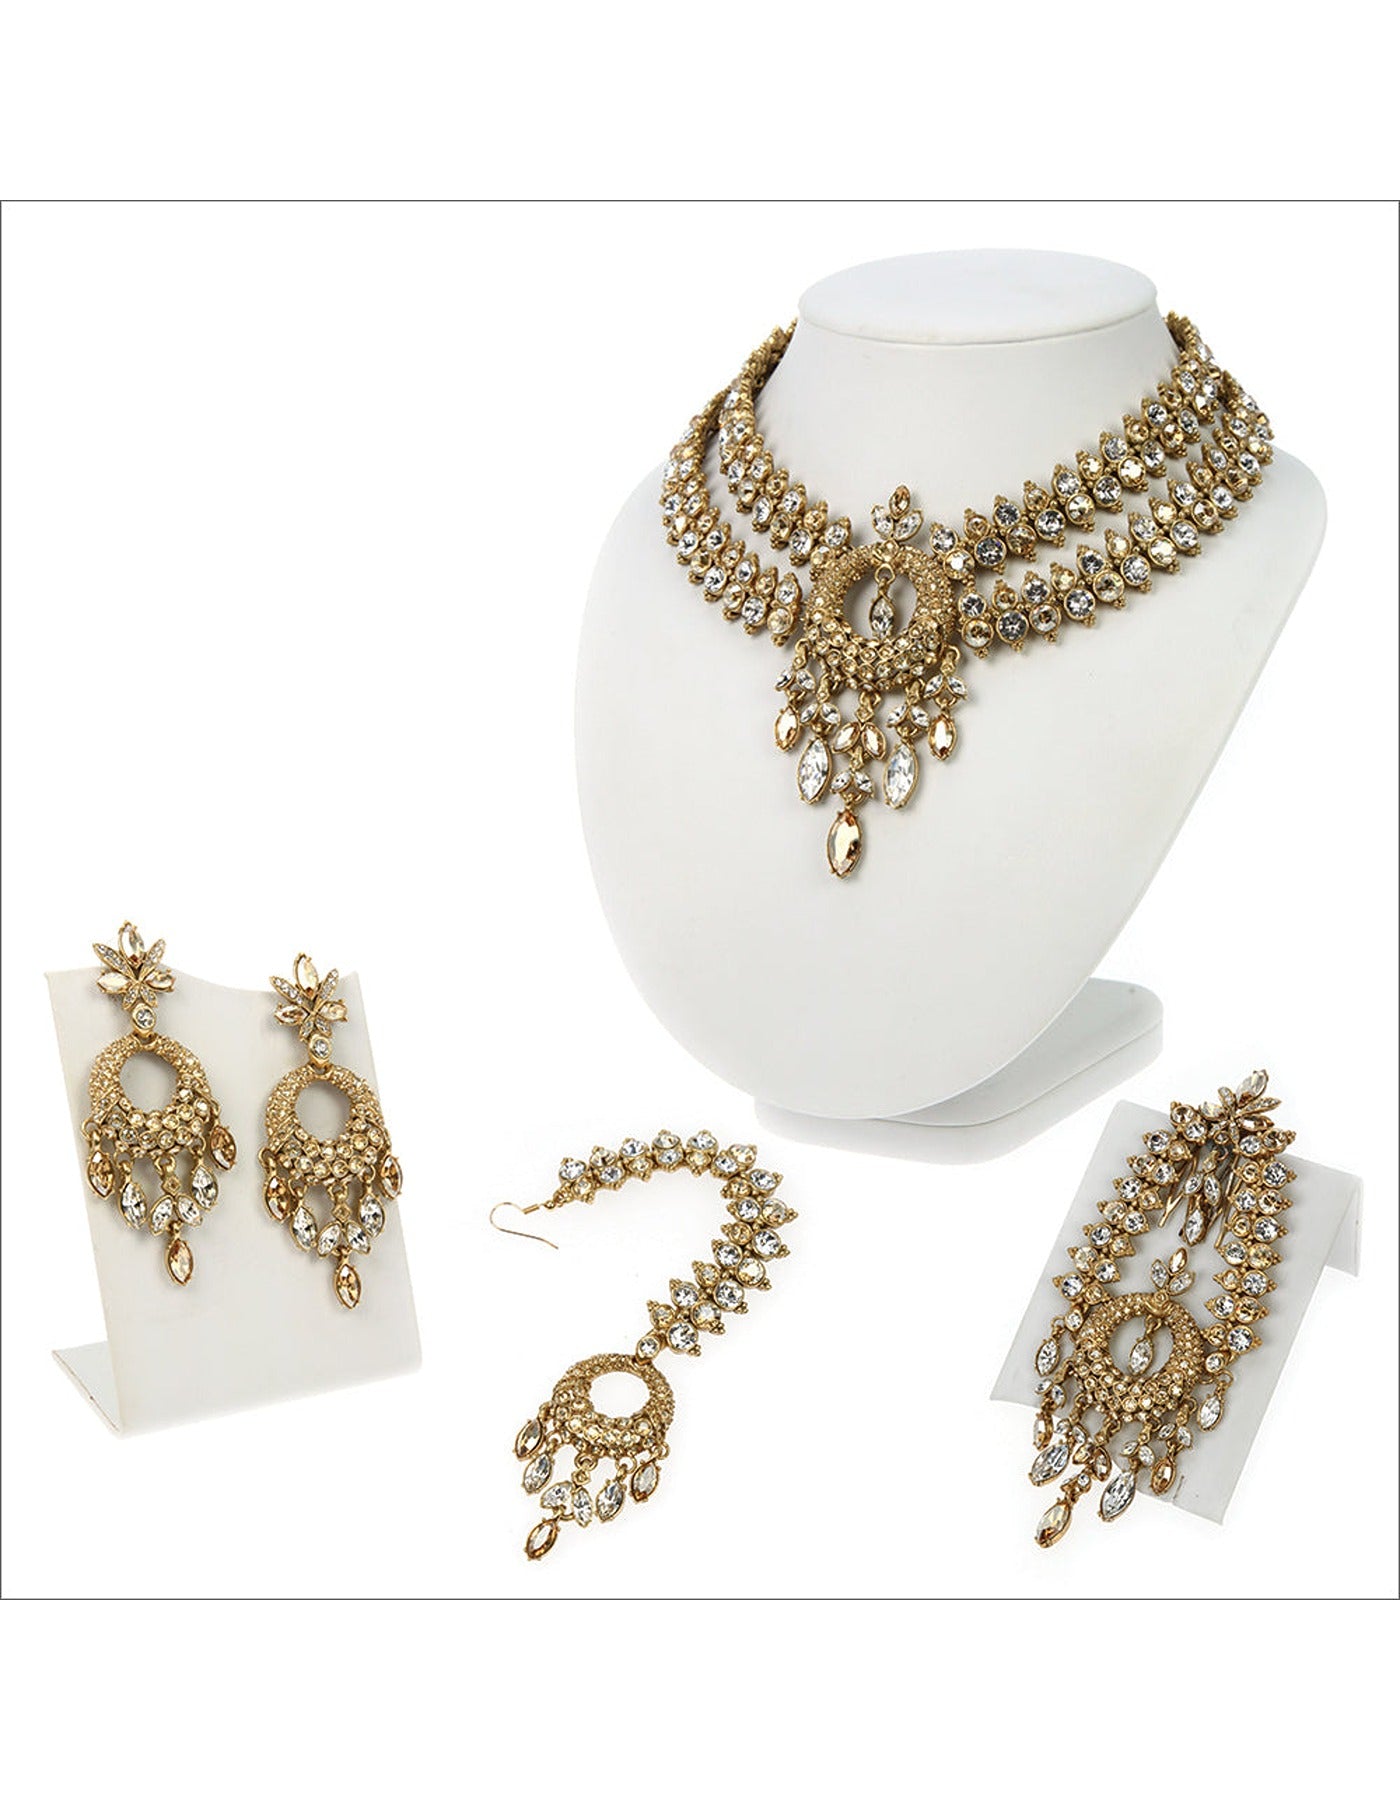 Antique Gold Jewelry with Crystal Golden Shadow and Clear Crystals